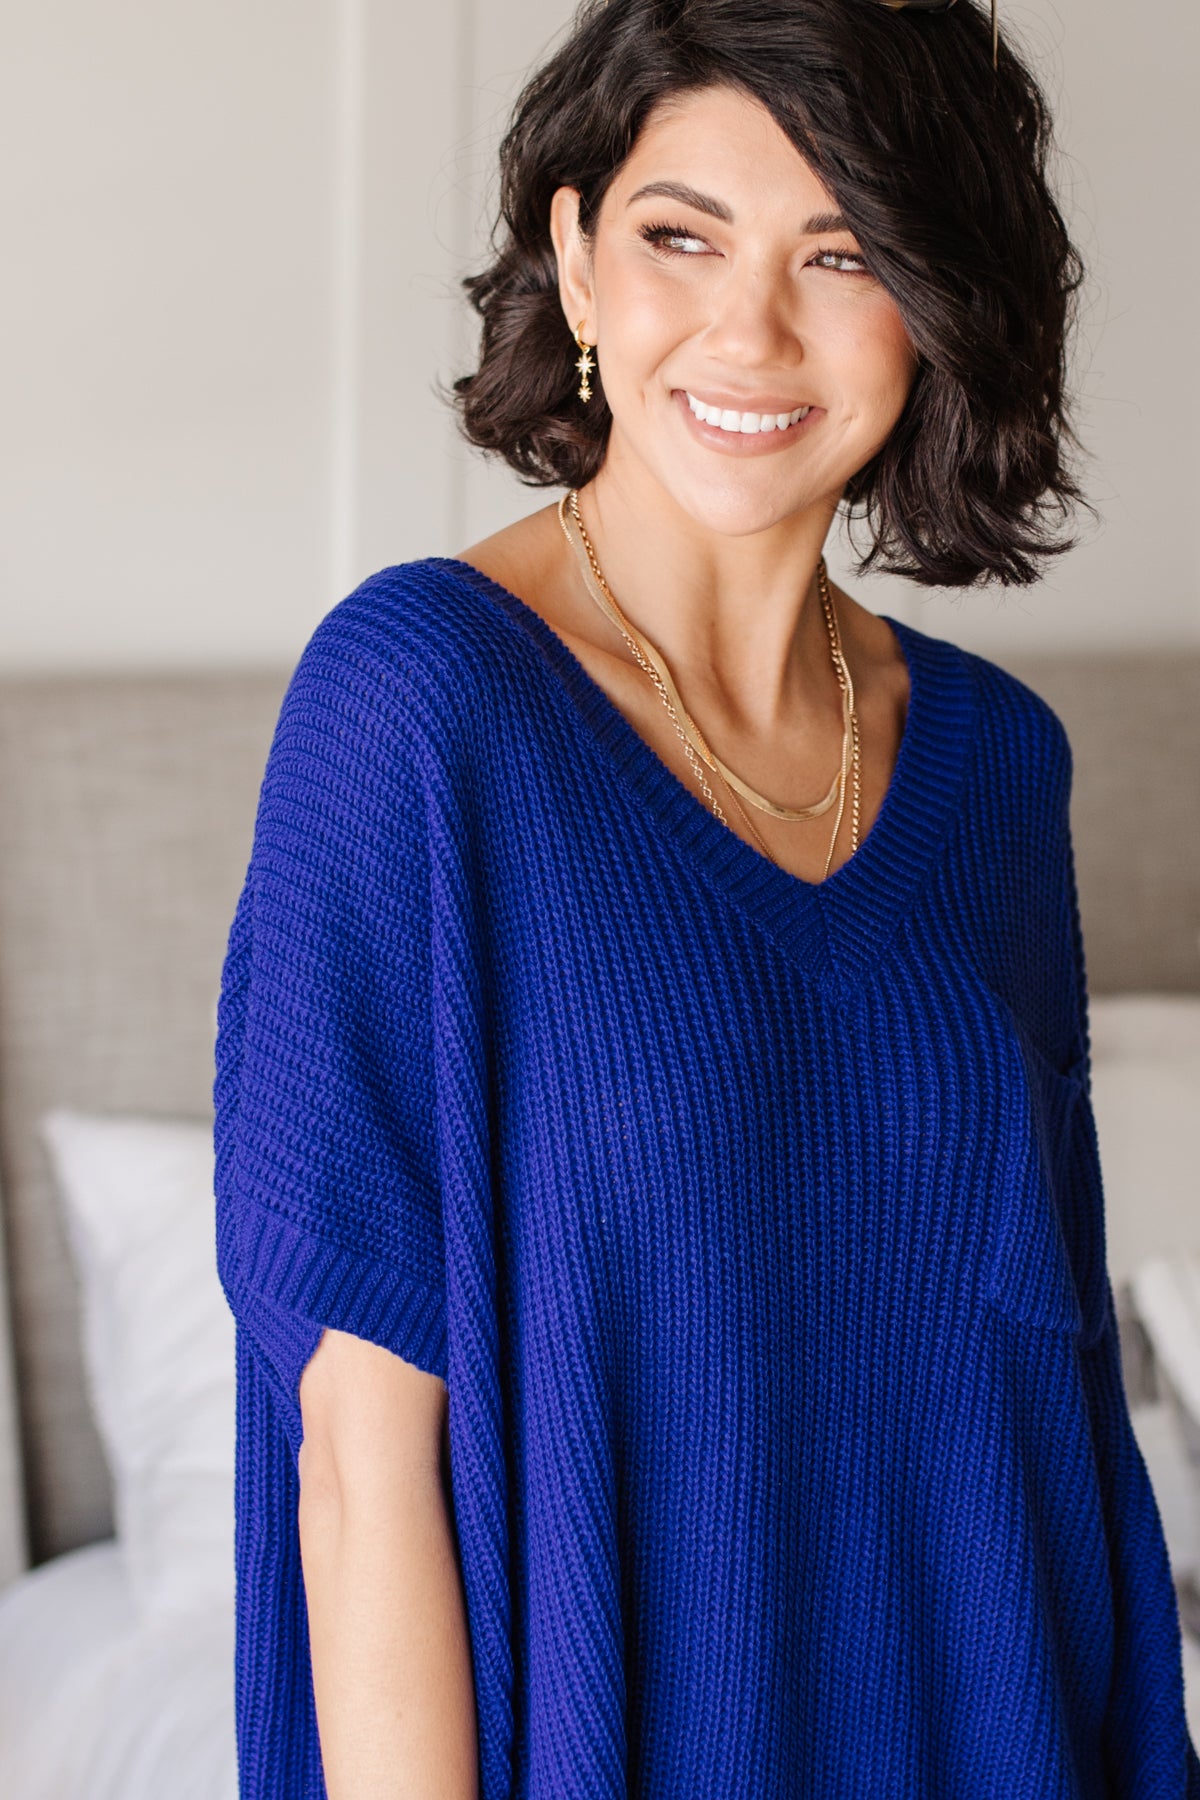 Pure Bliss Knit Top in Royal